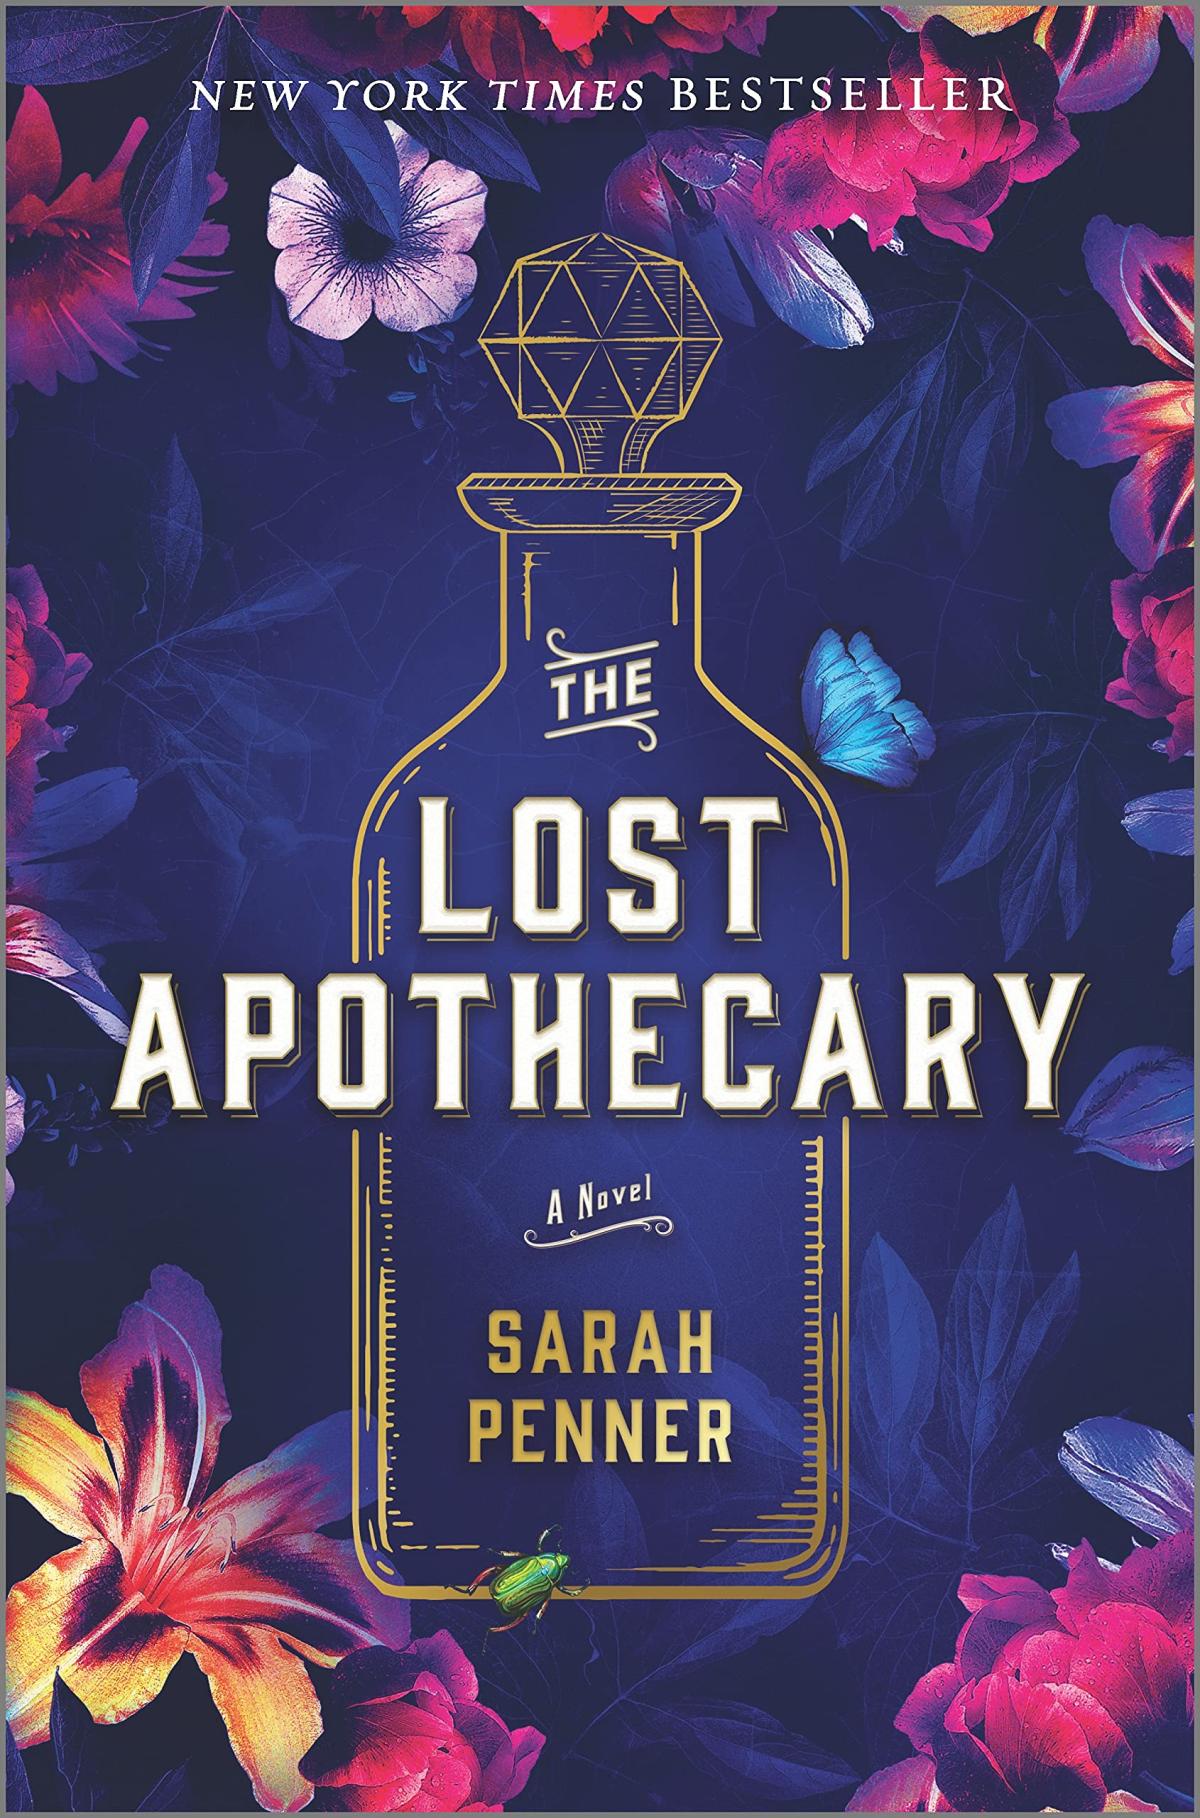 Cover of The Lost Apothecary by Sarah Penner. A bottle with a fancy stopper is in front of a floral background.